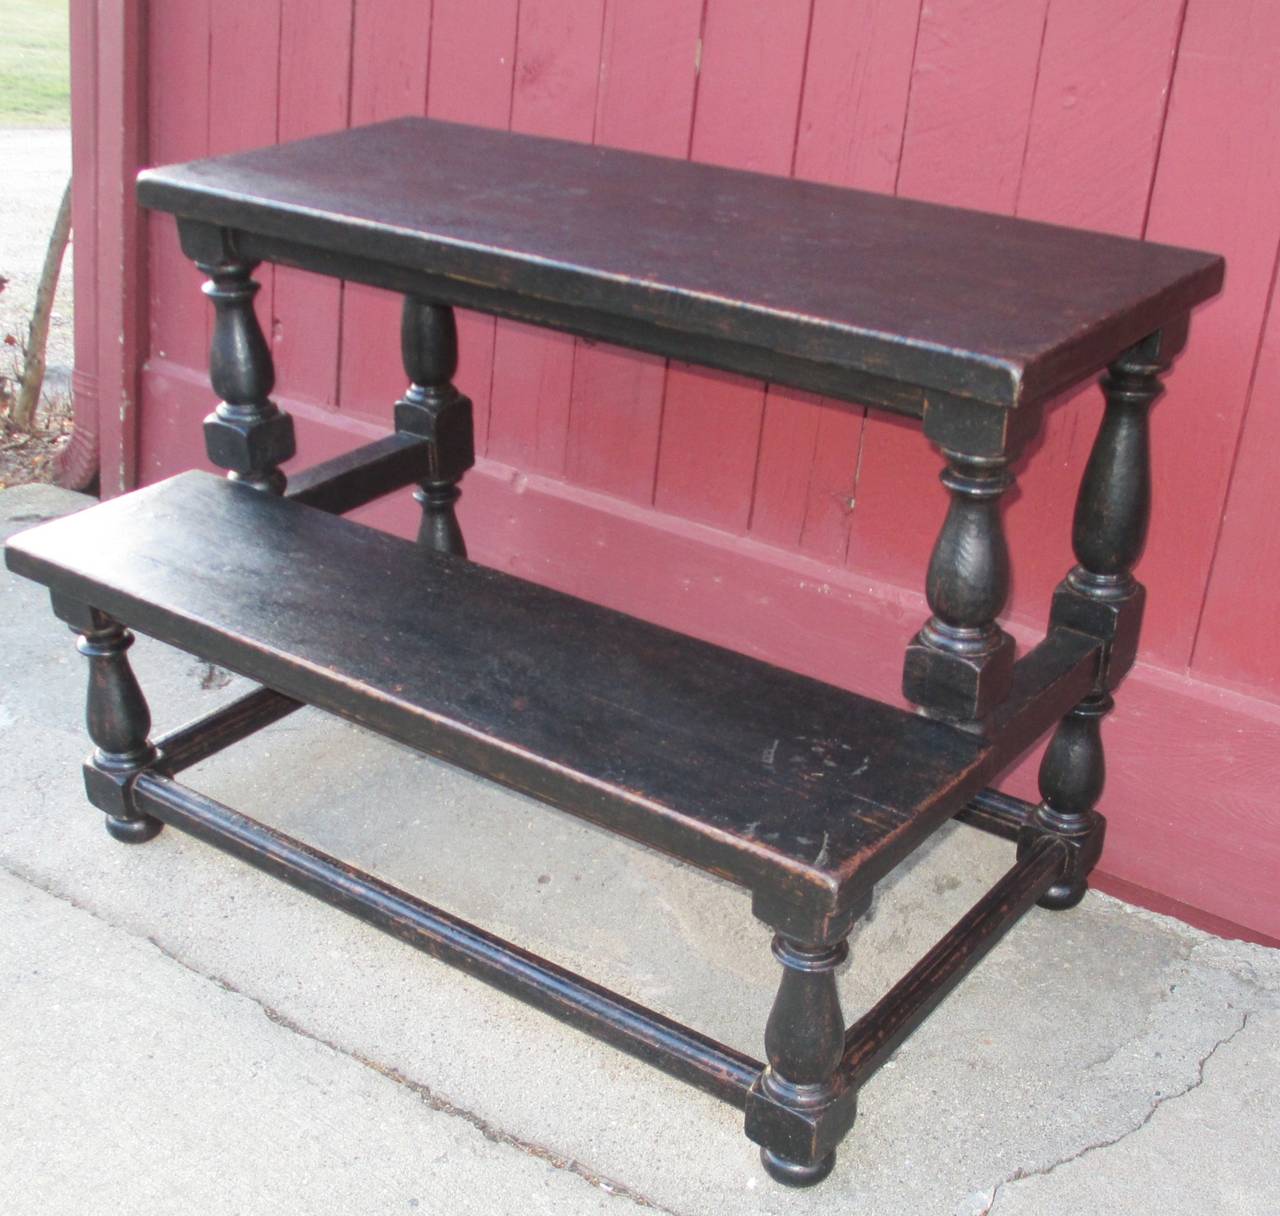 Black painted plant stand with wide shelf and turned legs.